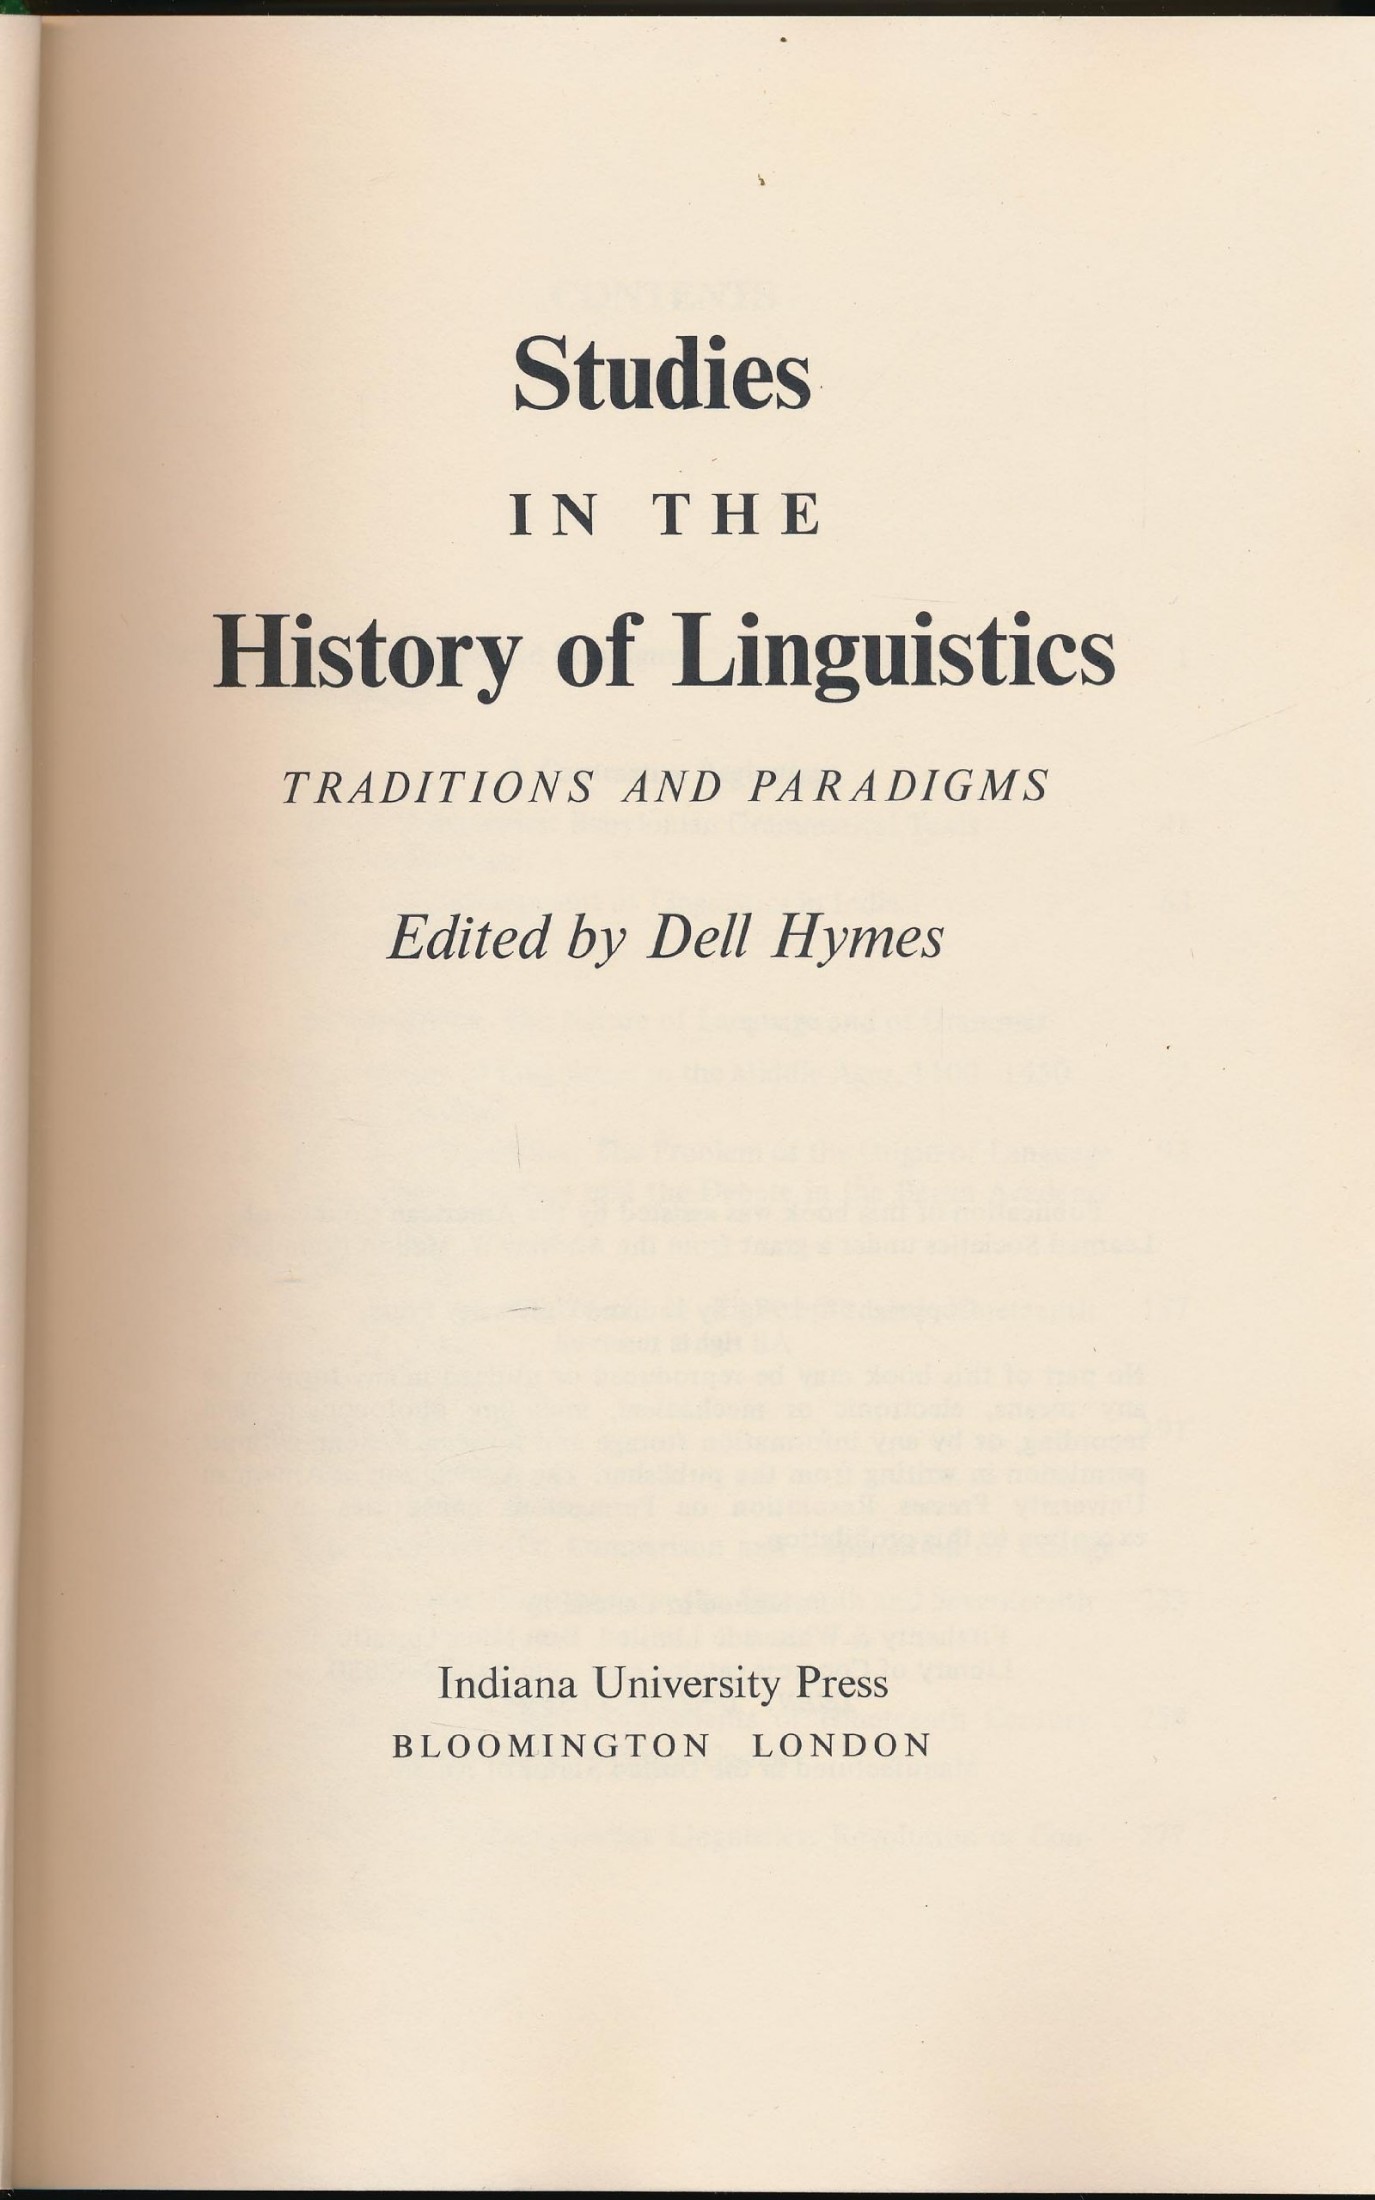 Studies in the History of Linguistics: Traditions and Paradigms